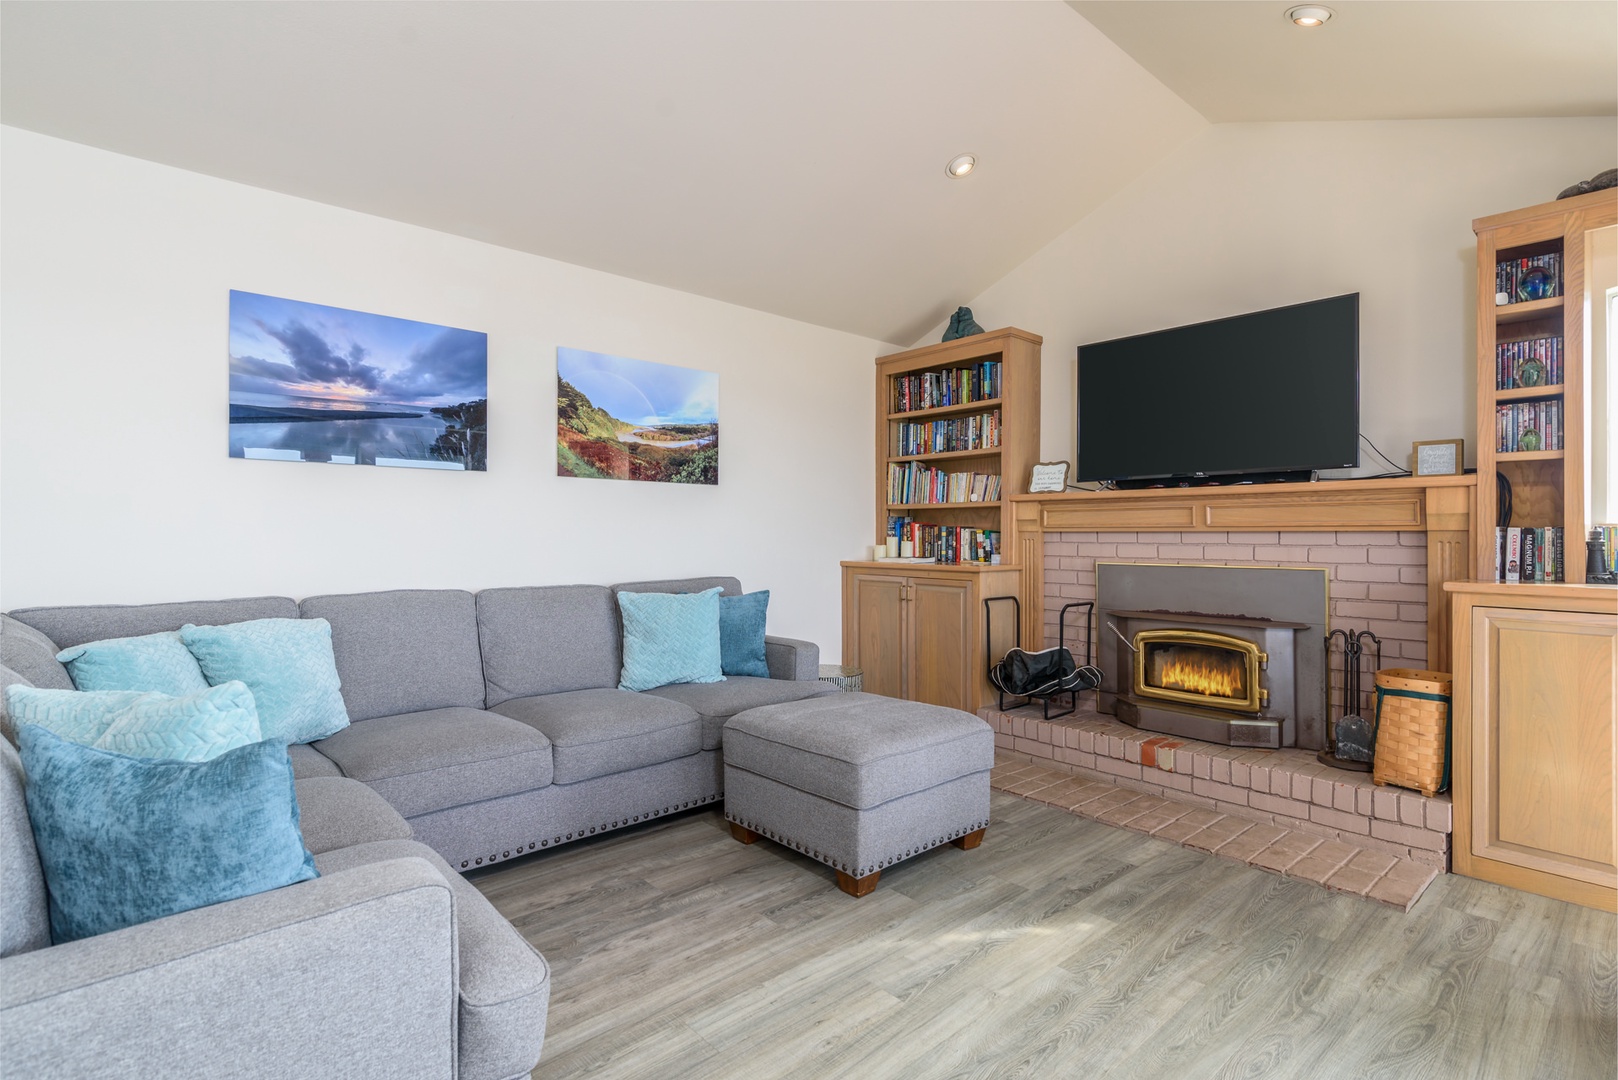 Living space with Smart TV, and wood fireplace